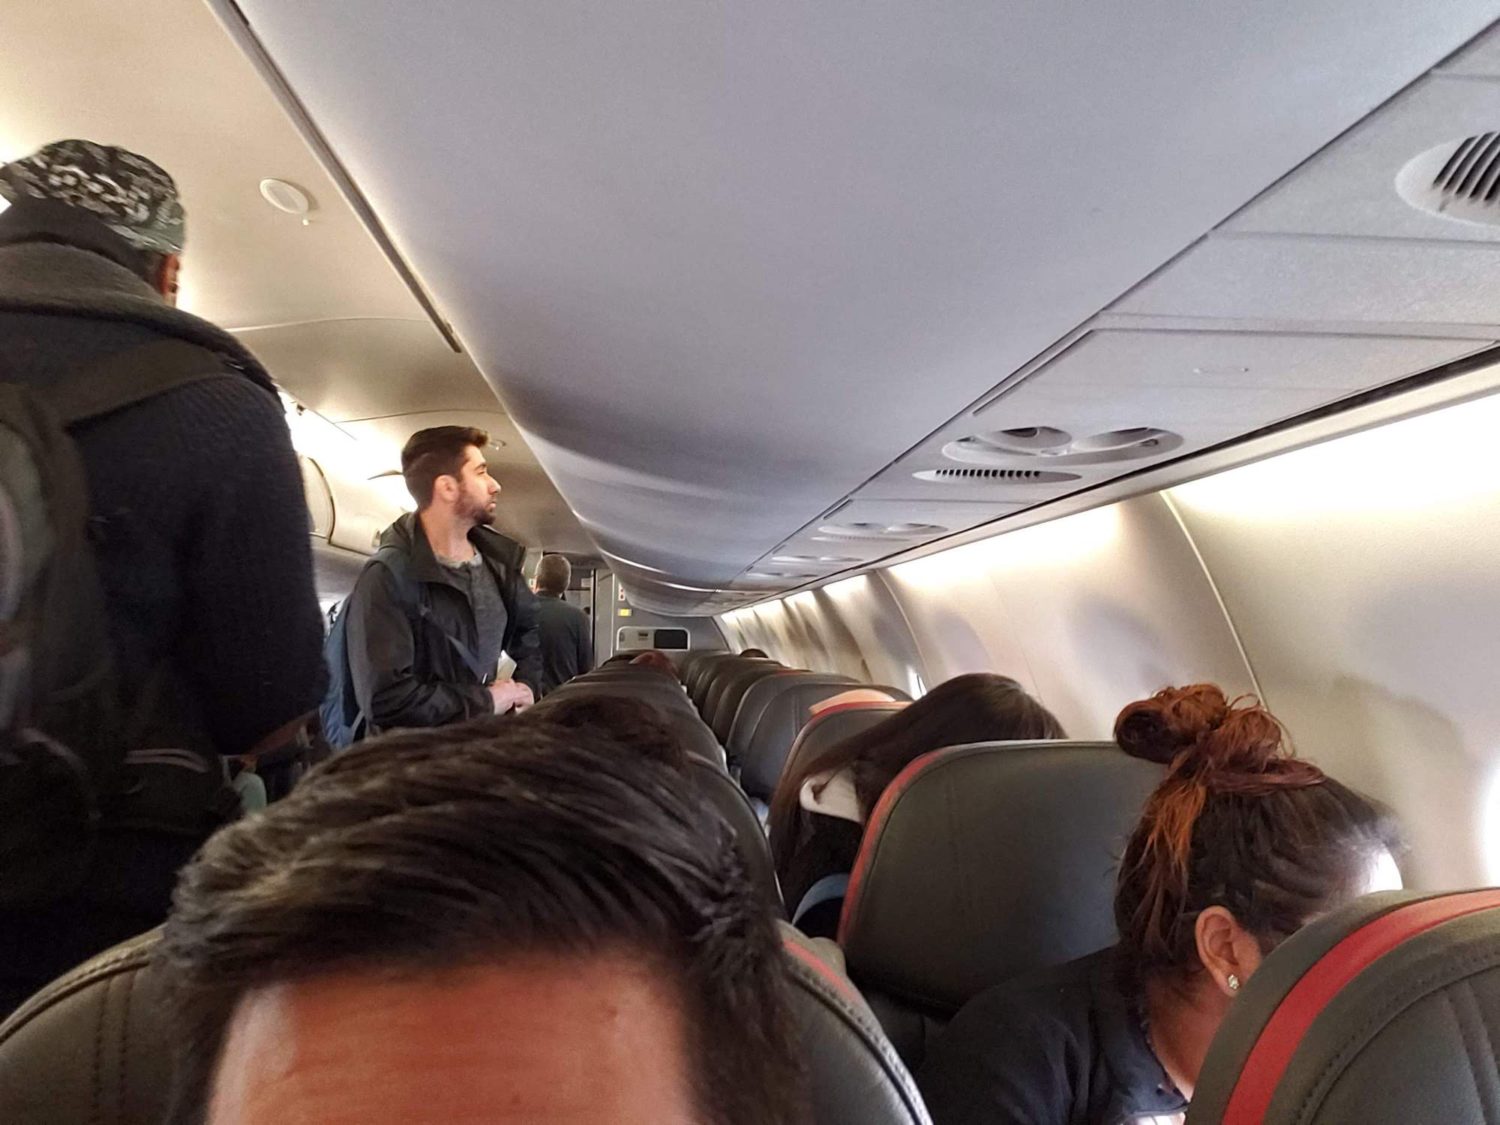 No mask on flight required for airline.